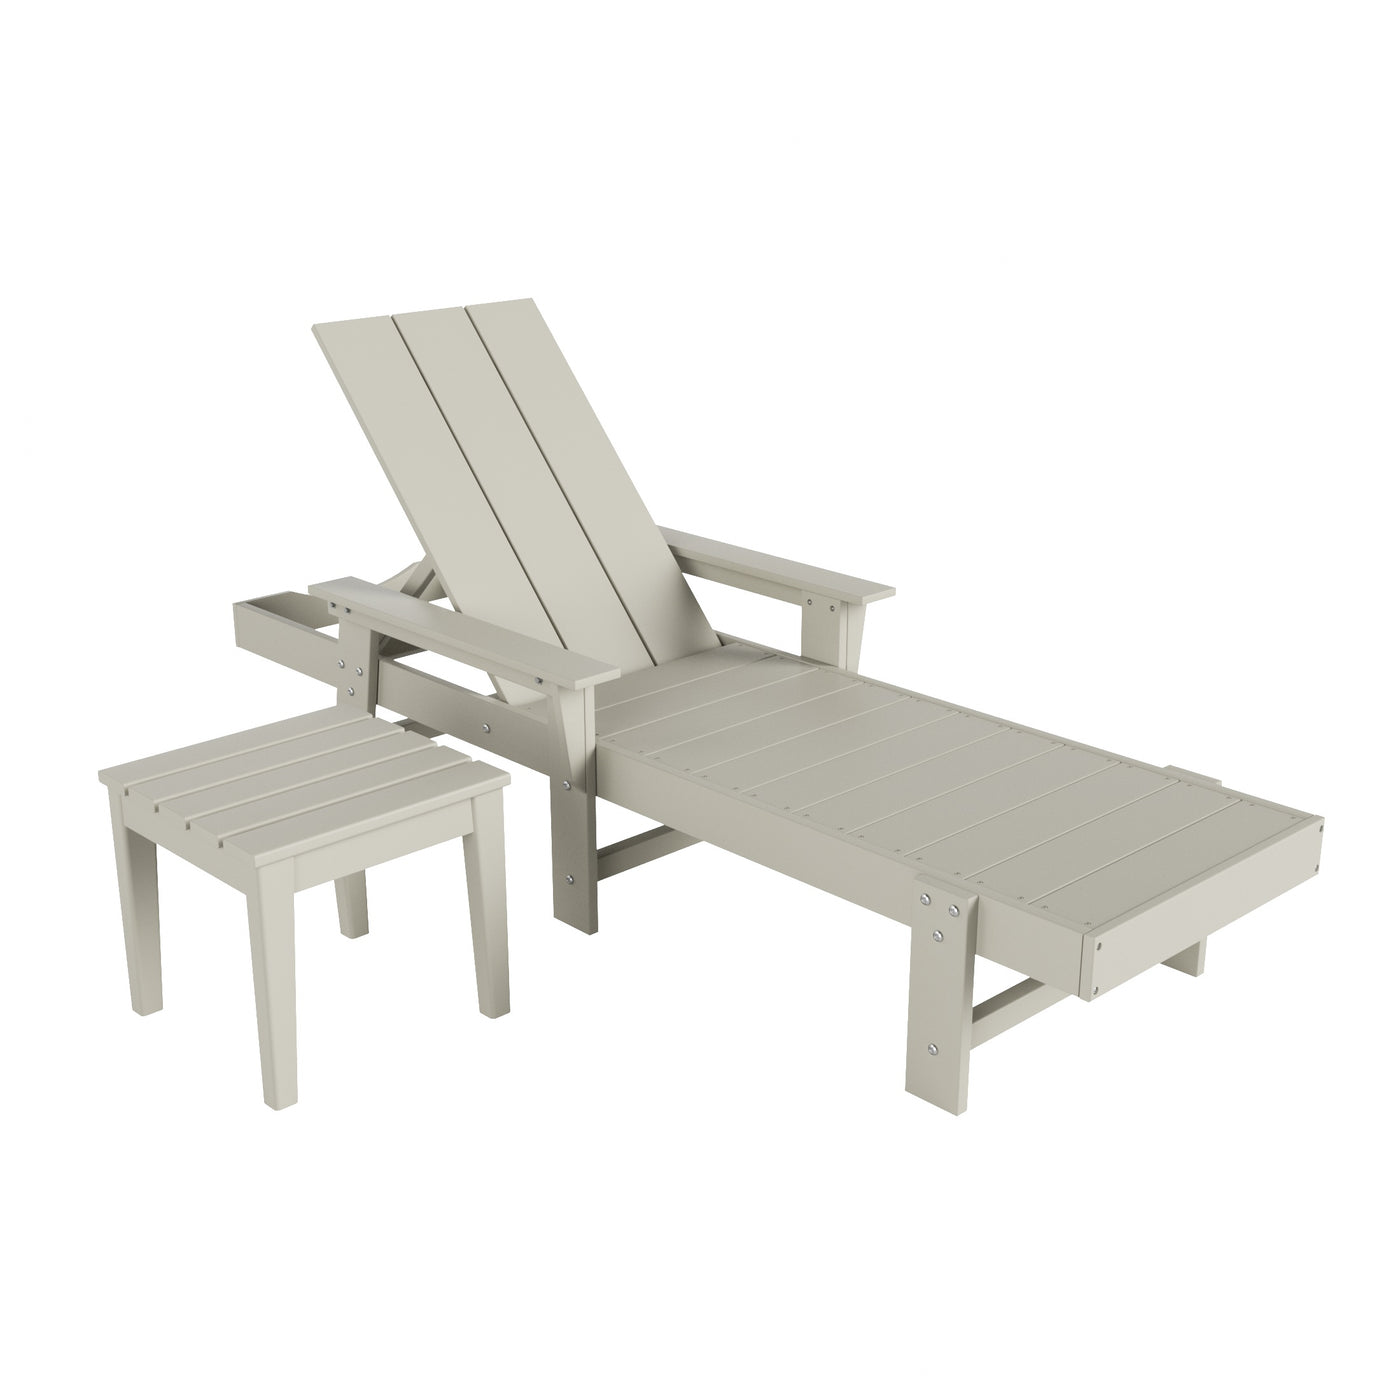 Ashore Modern Reclining Chaise Lounge with Side Table 2-Piece Set